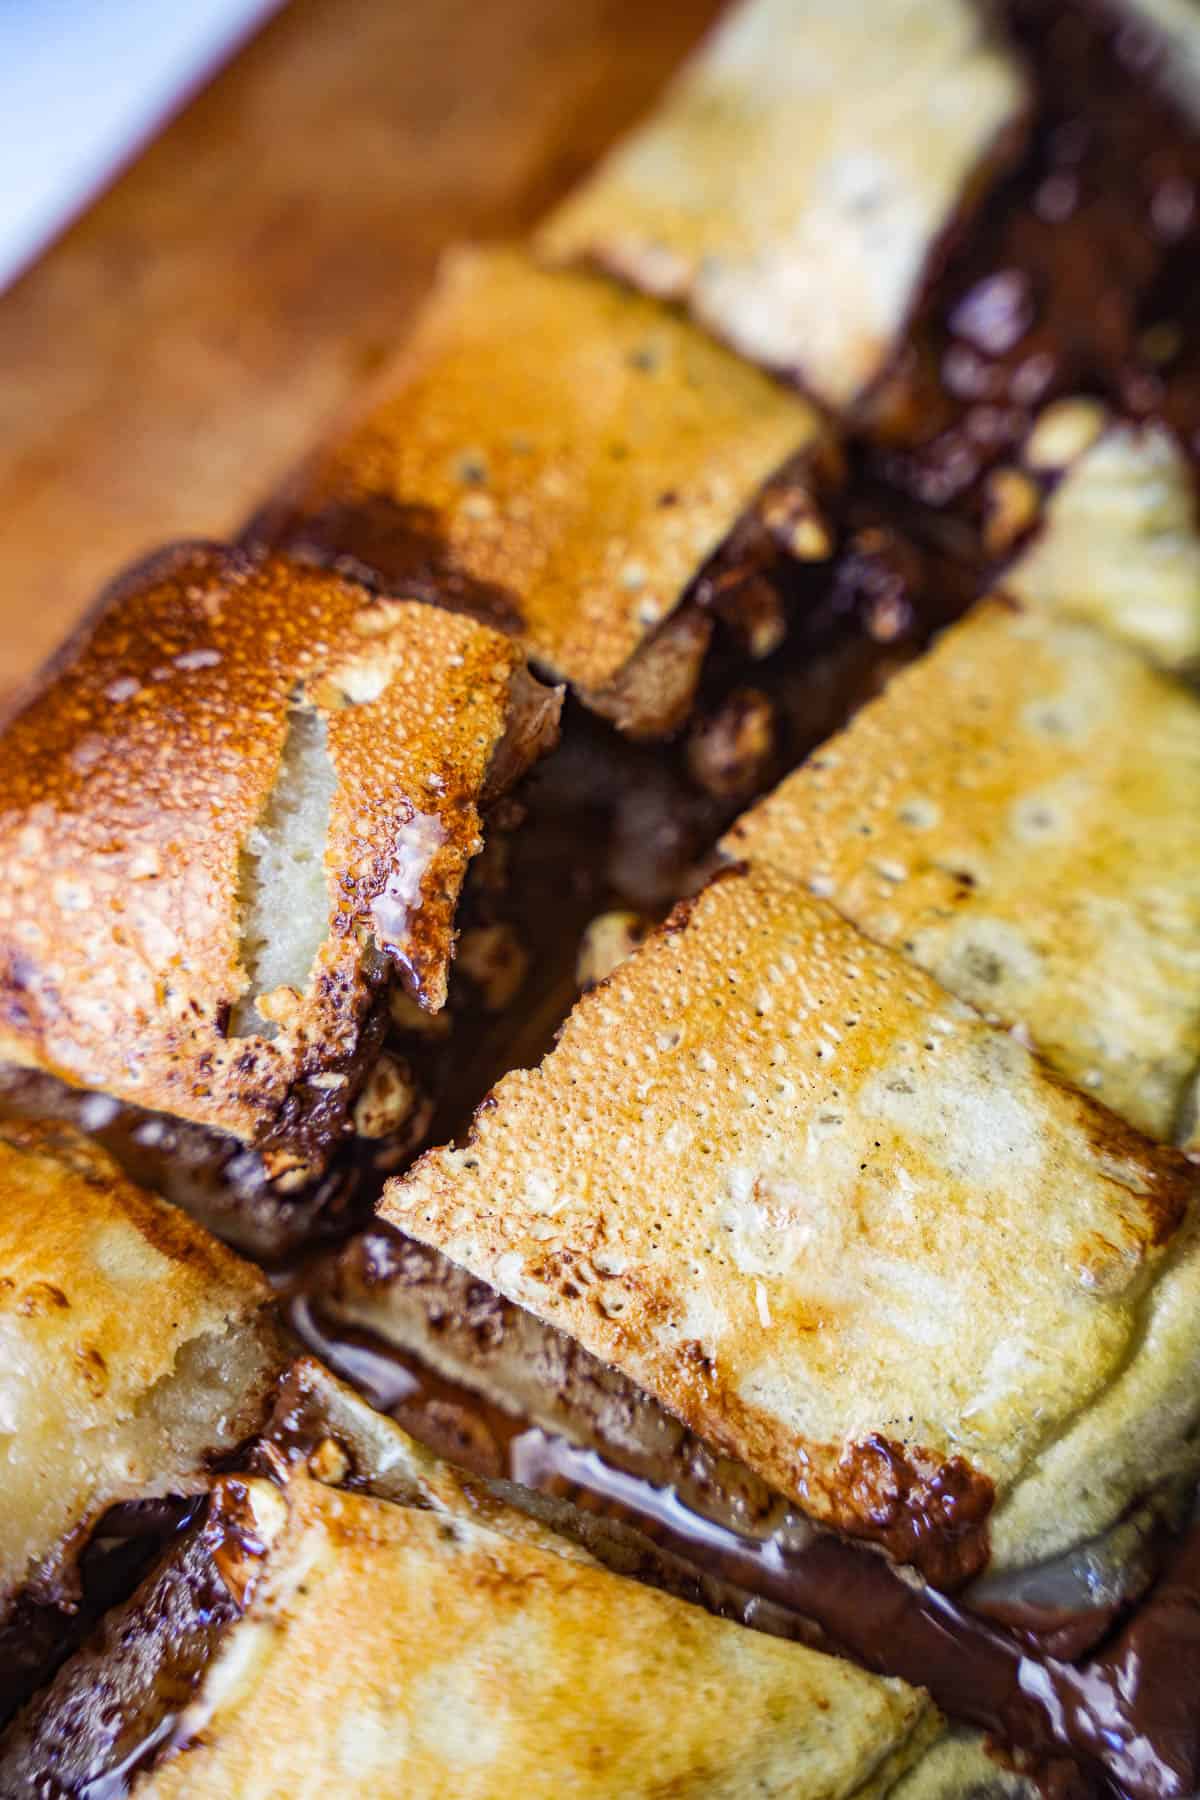 The martabak is cut into small rectangular pieces. It is wet from being drizzled with condensed coconut milk.